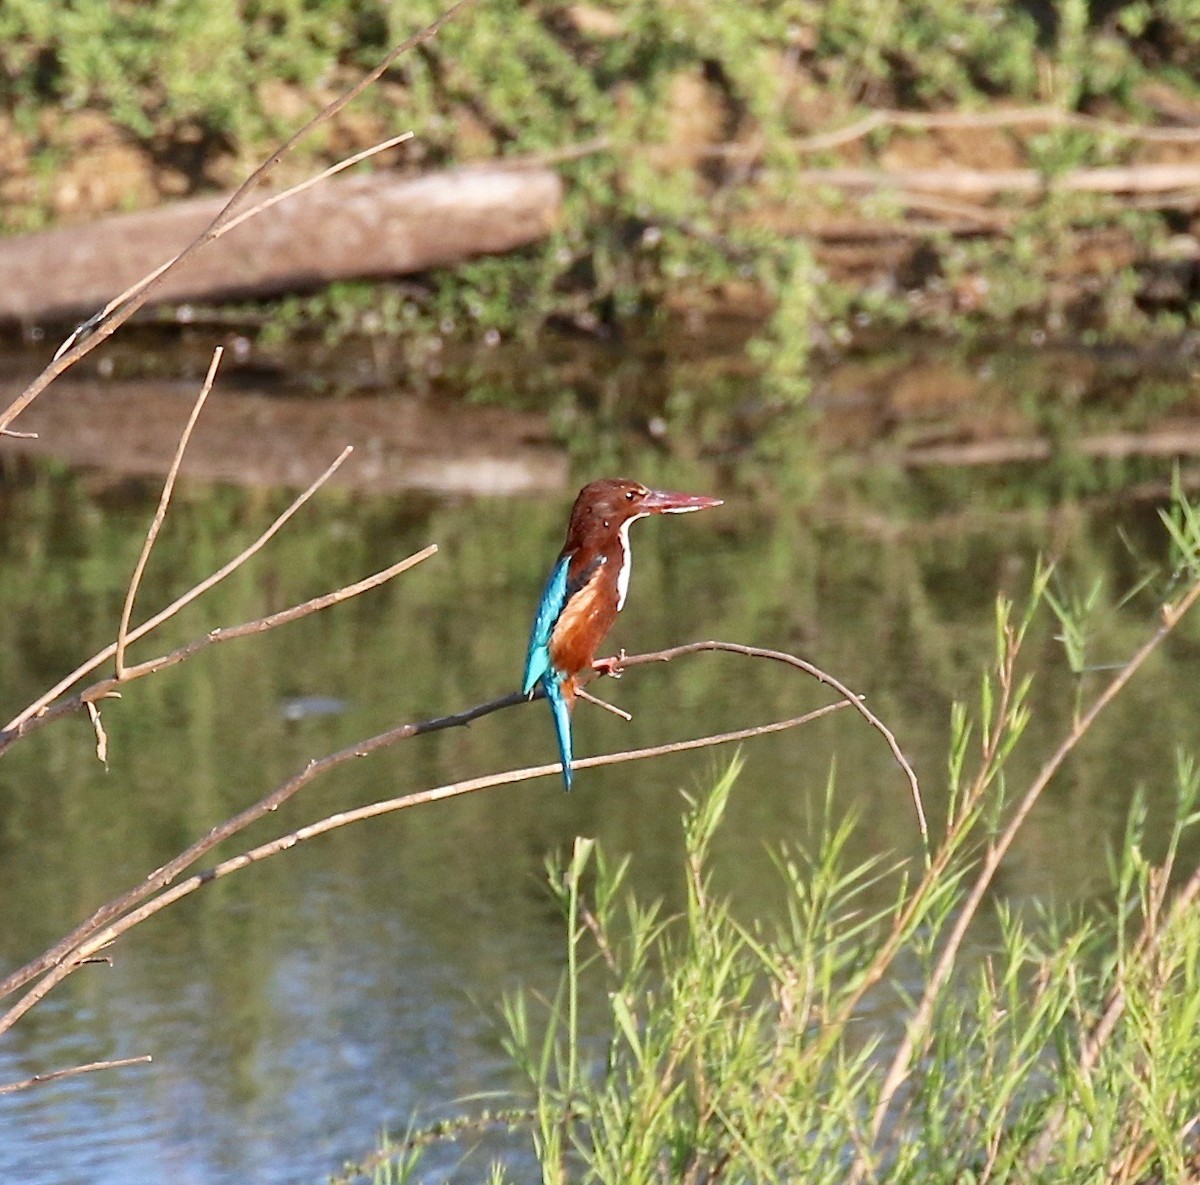 White-throated Kingfisher - Sandy Vorpahl